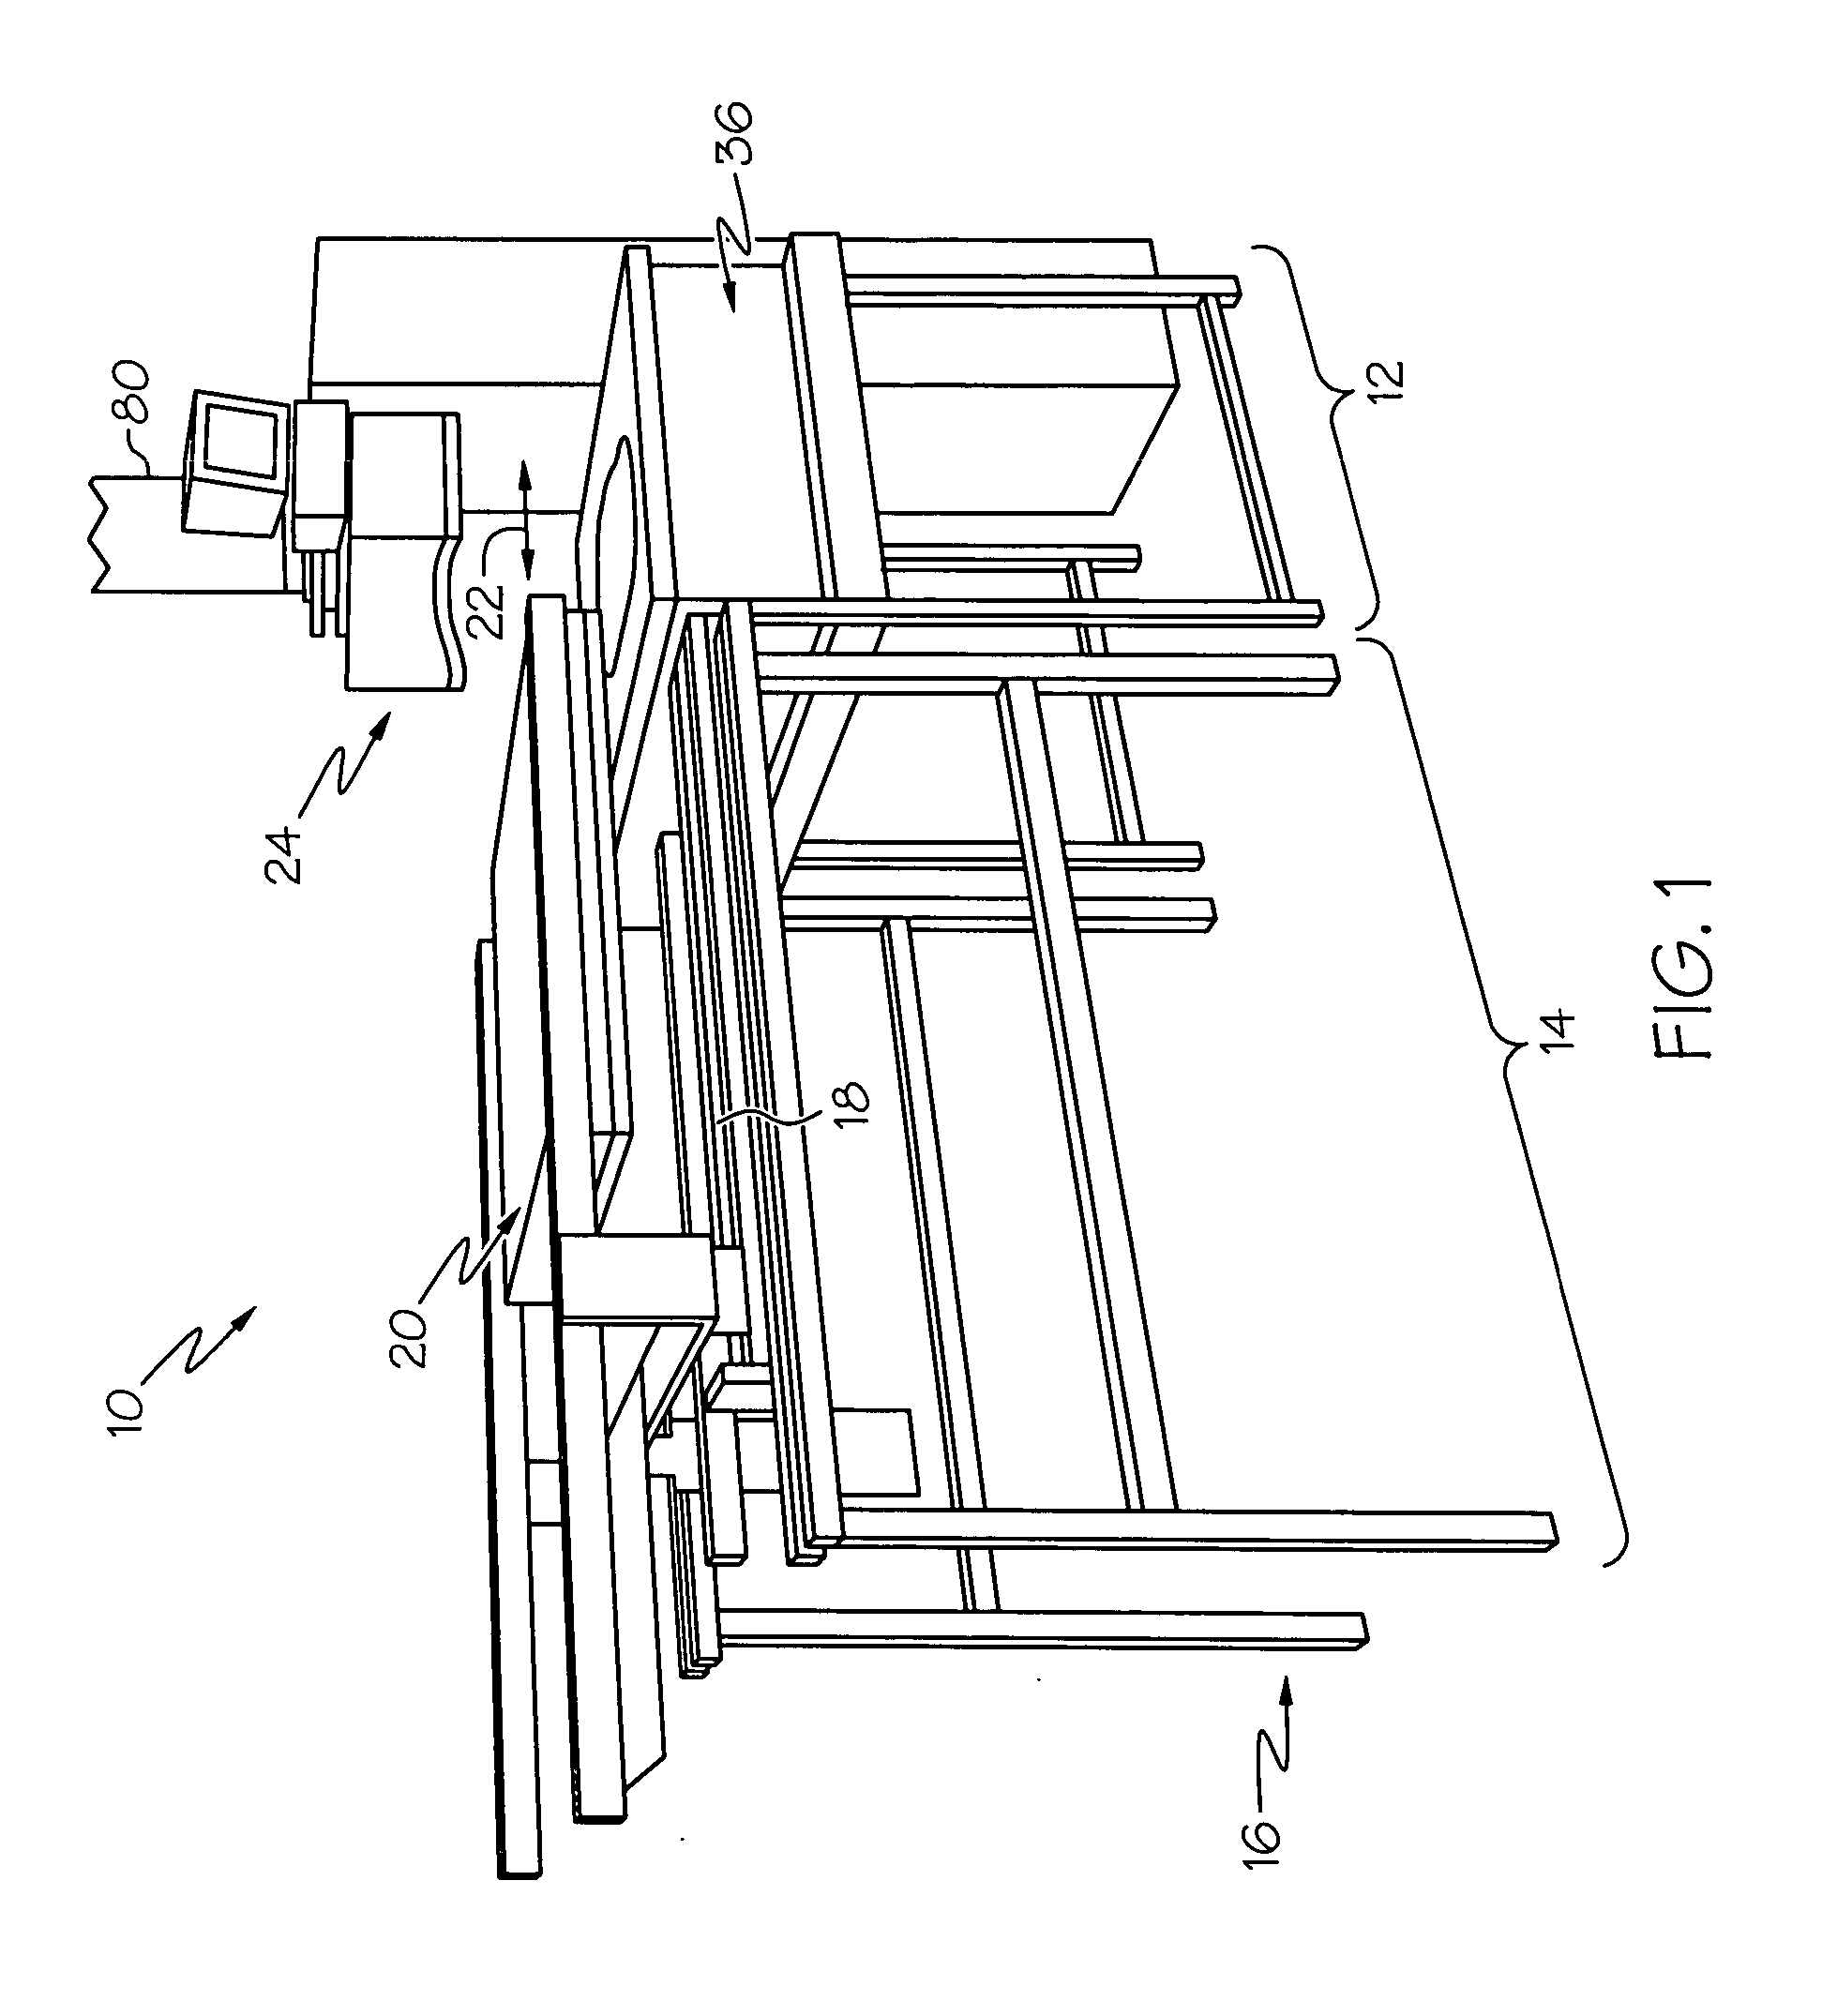 Method for making cushioned product with integral cover